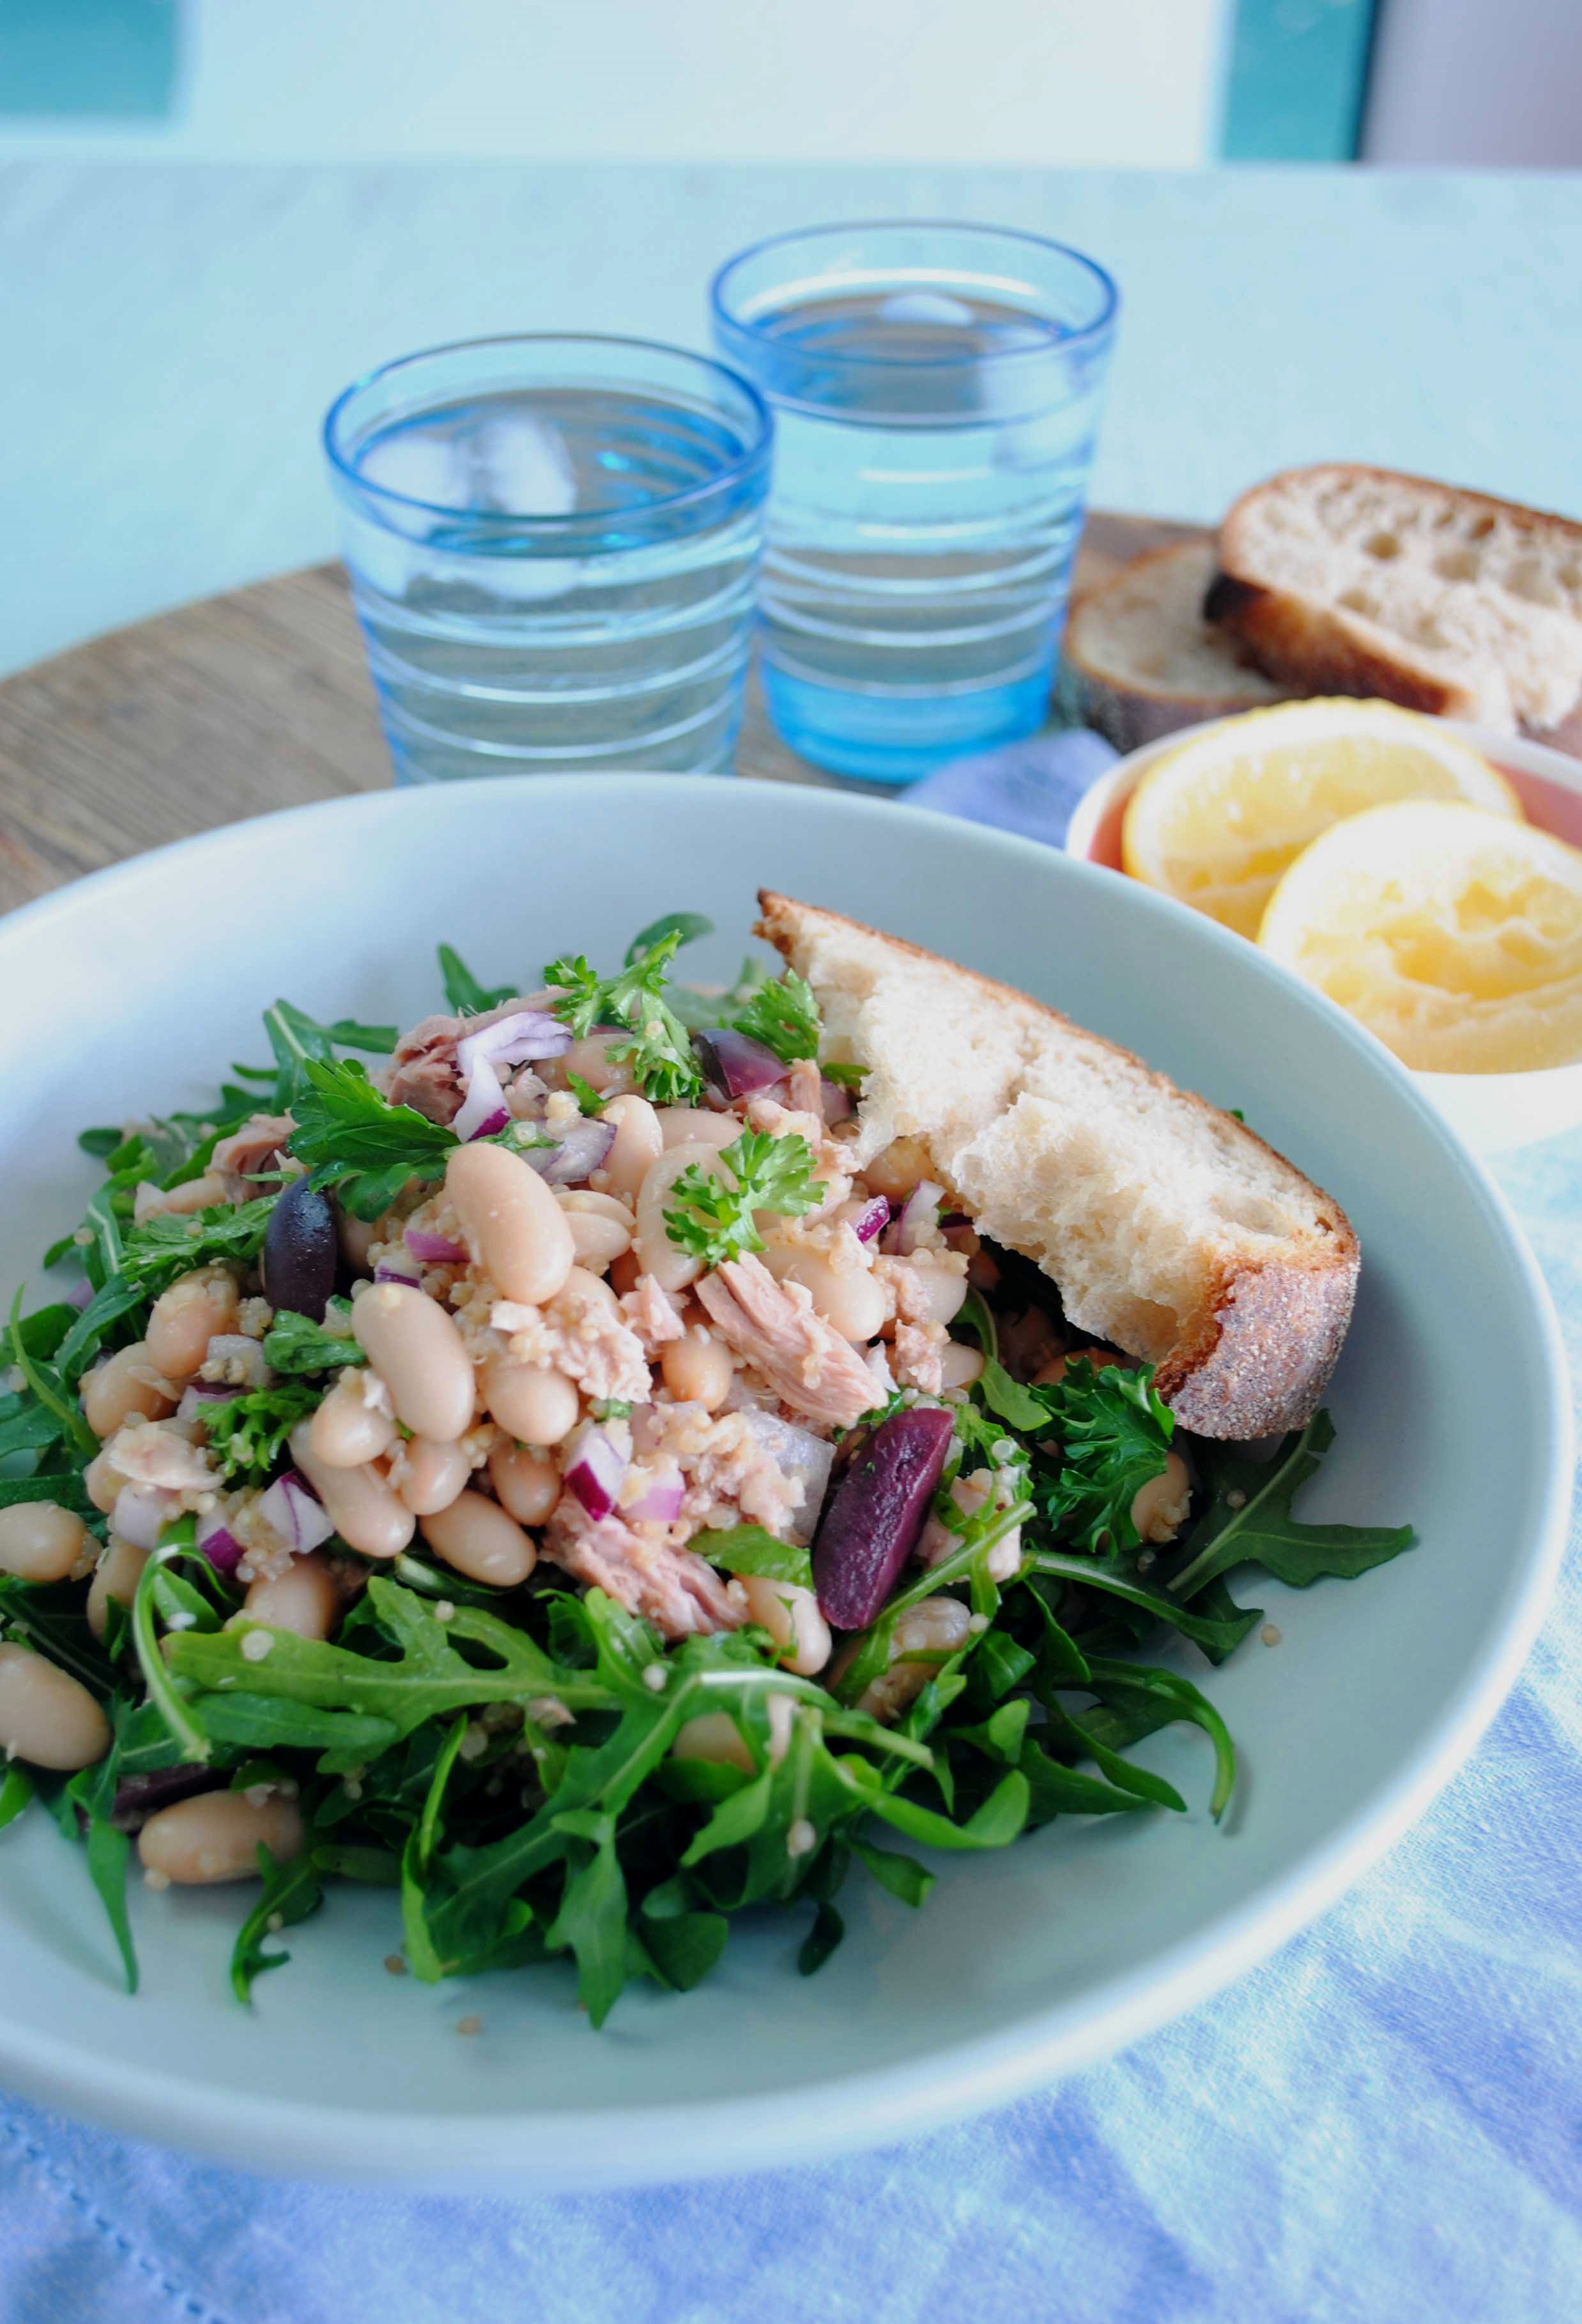 Tuna and cannellini bean salad - Catherine Saxelby's Foodwatch